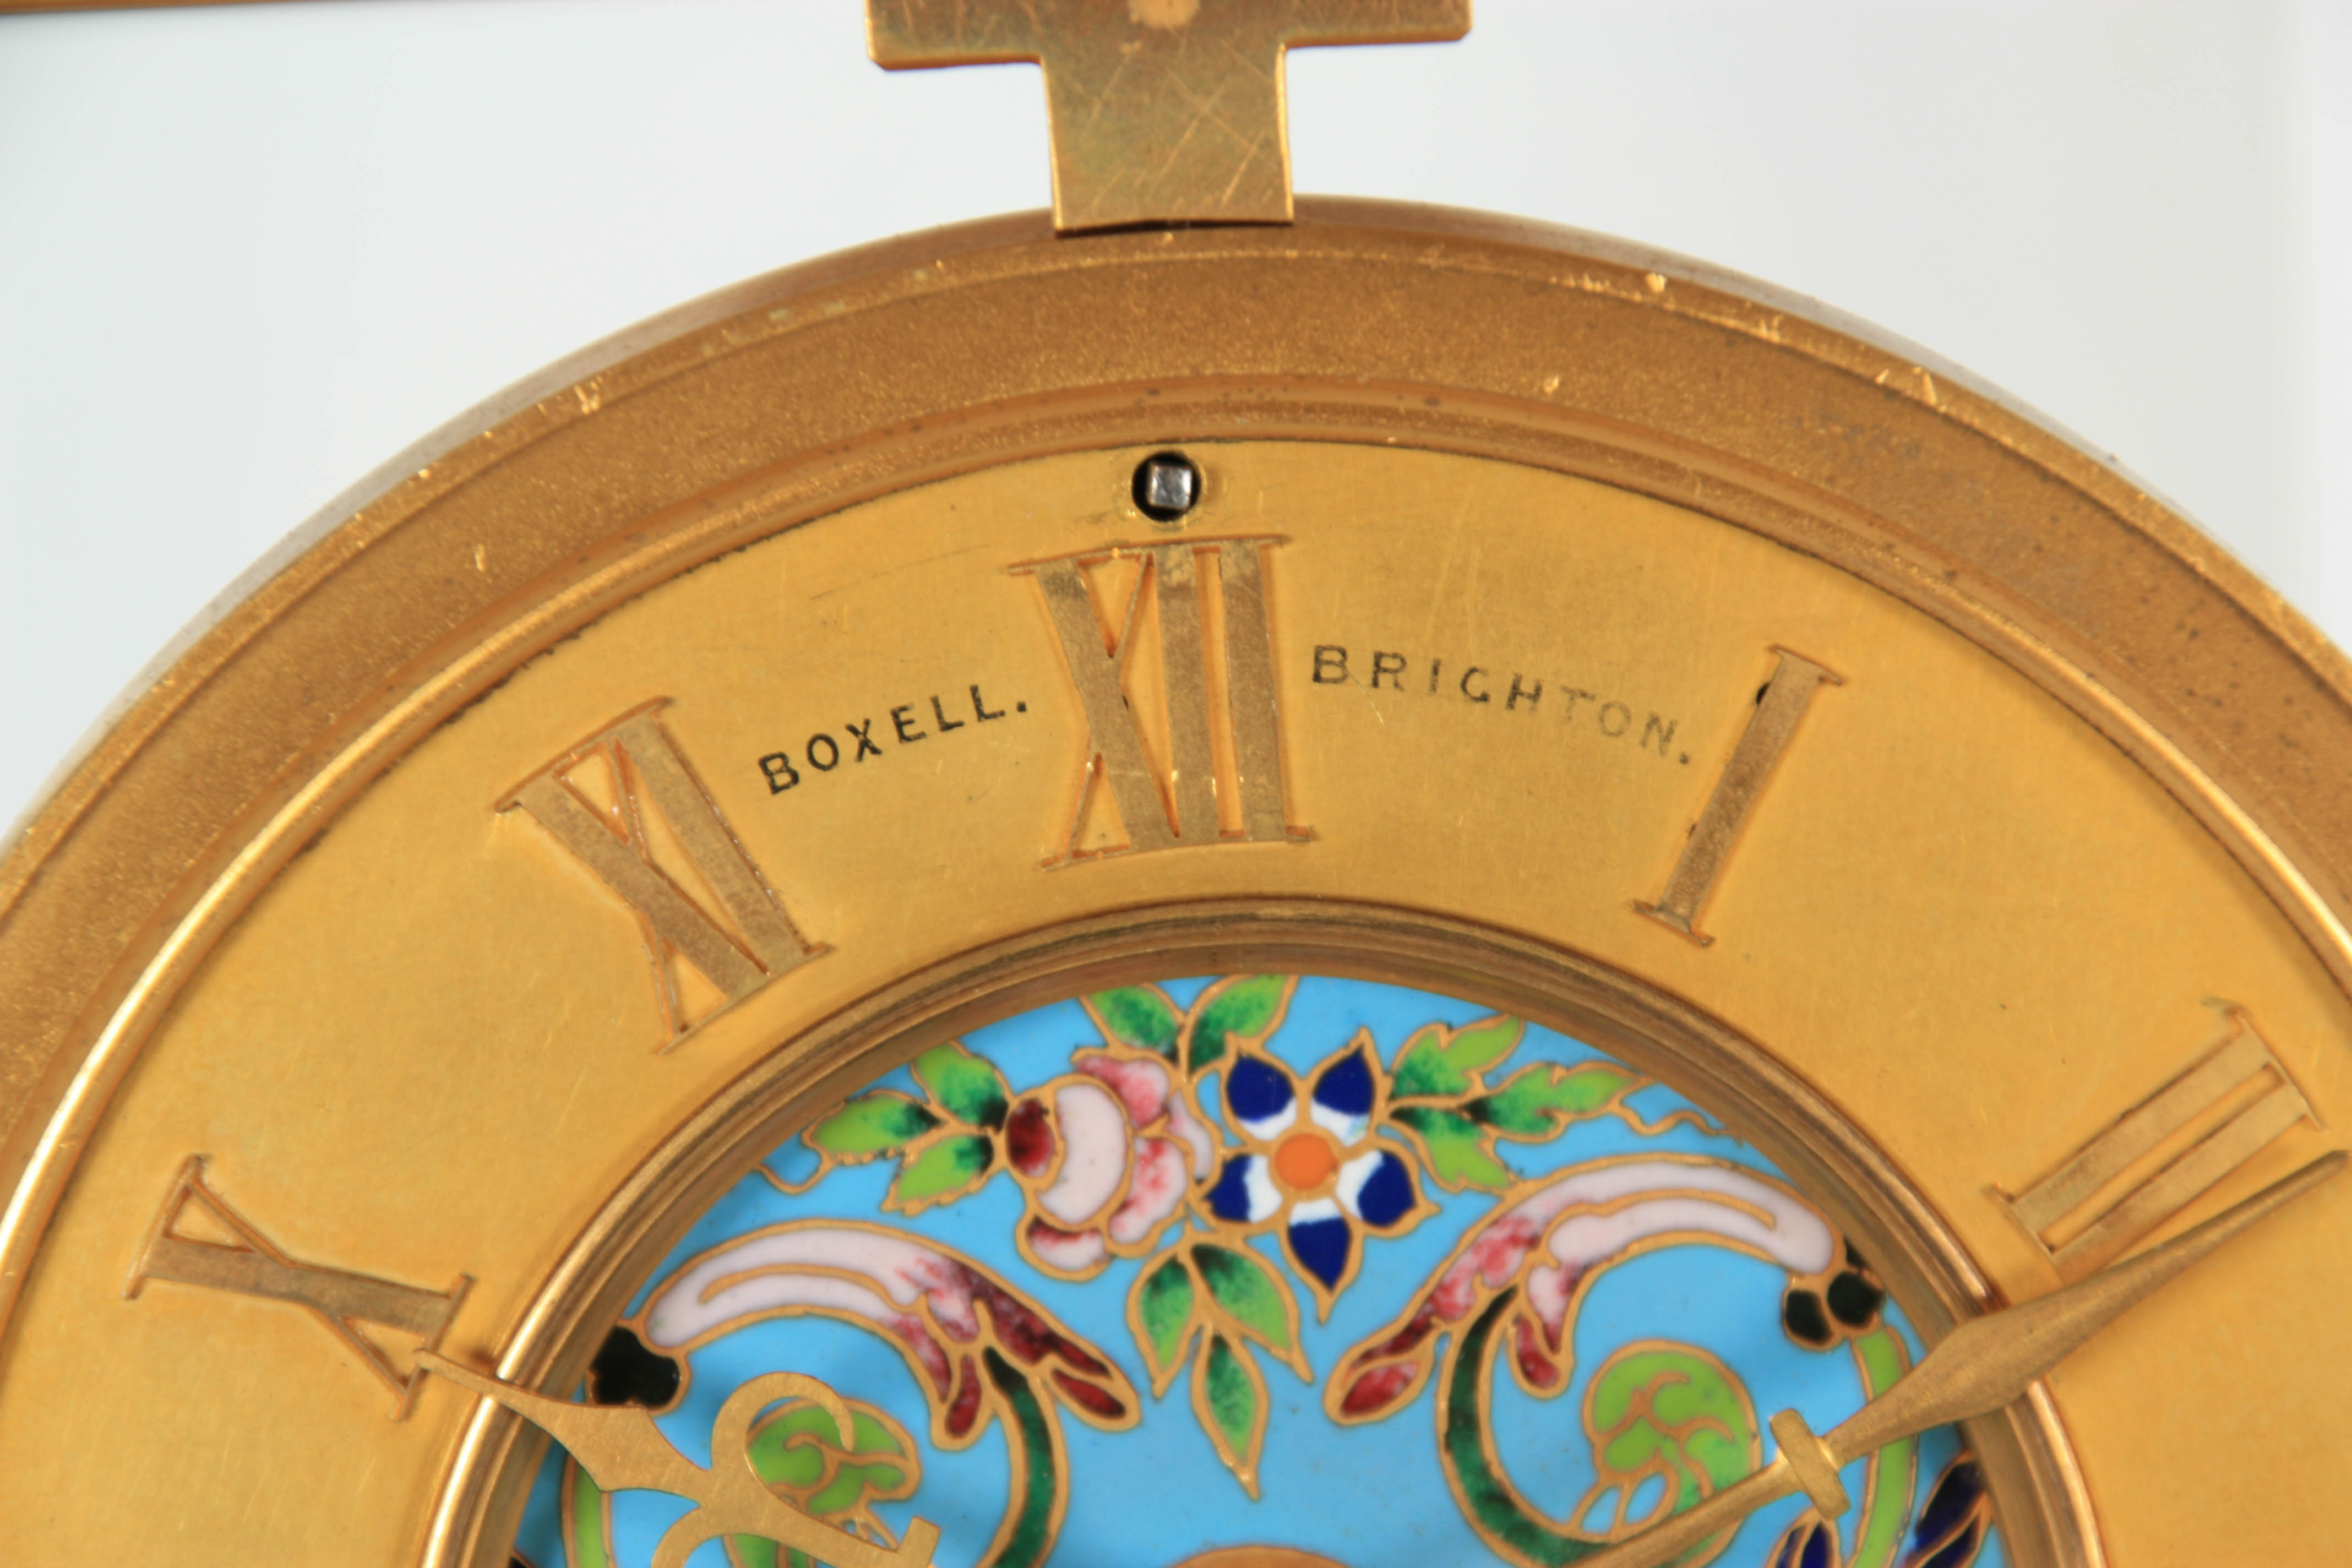 BOXHILL, BRIGHTON A LATE 19TH CENTURY FRENCH ORMOLU AND CHAMPLEVE ENAMEL CLOCK GARNITURE the four- - Image 8 of 14